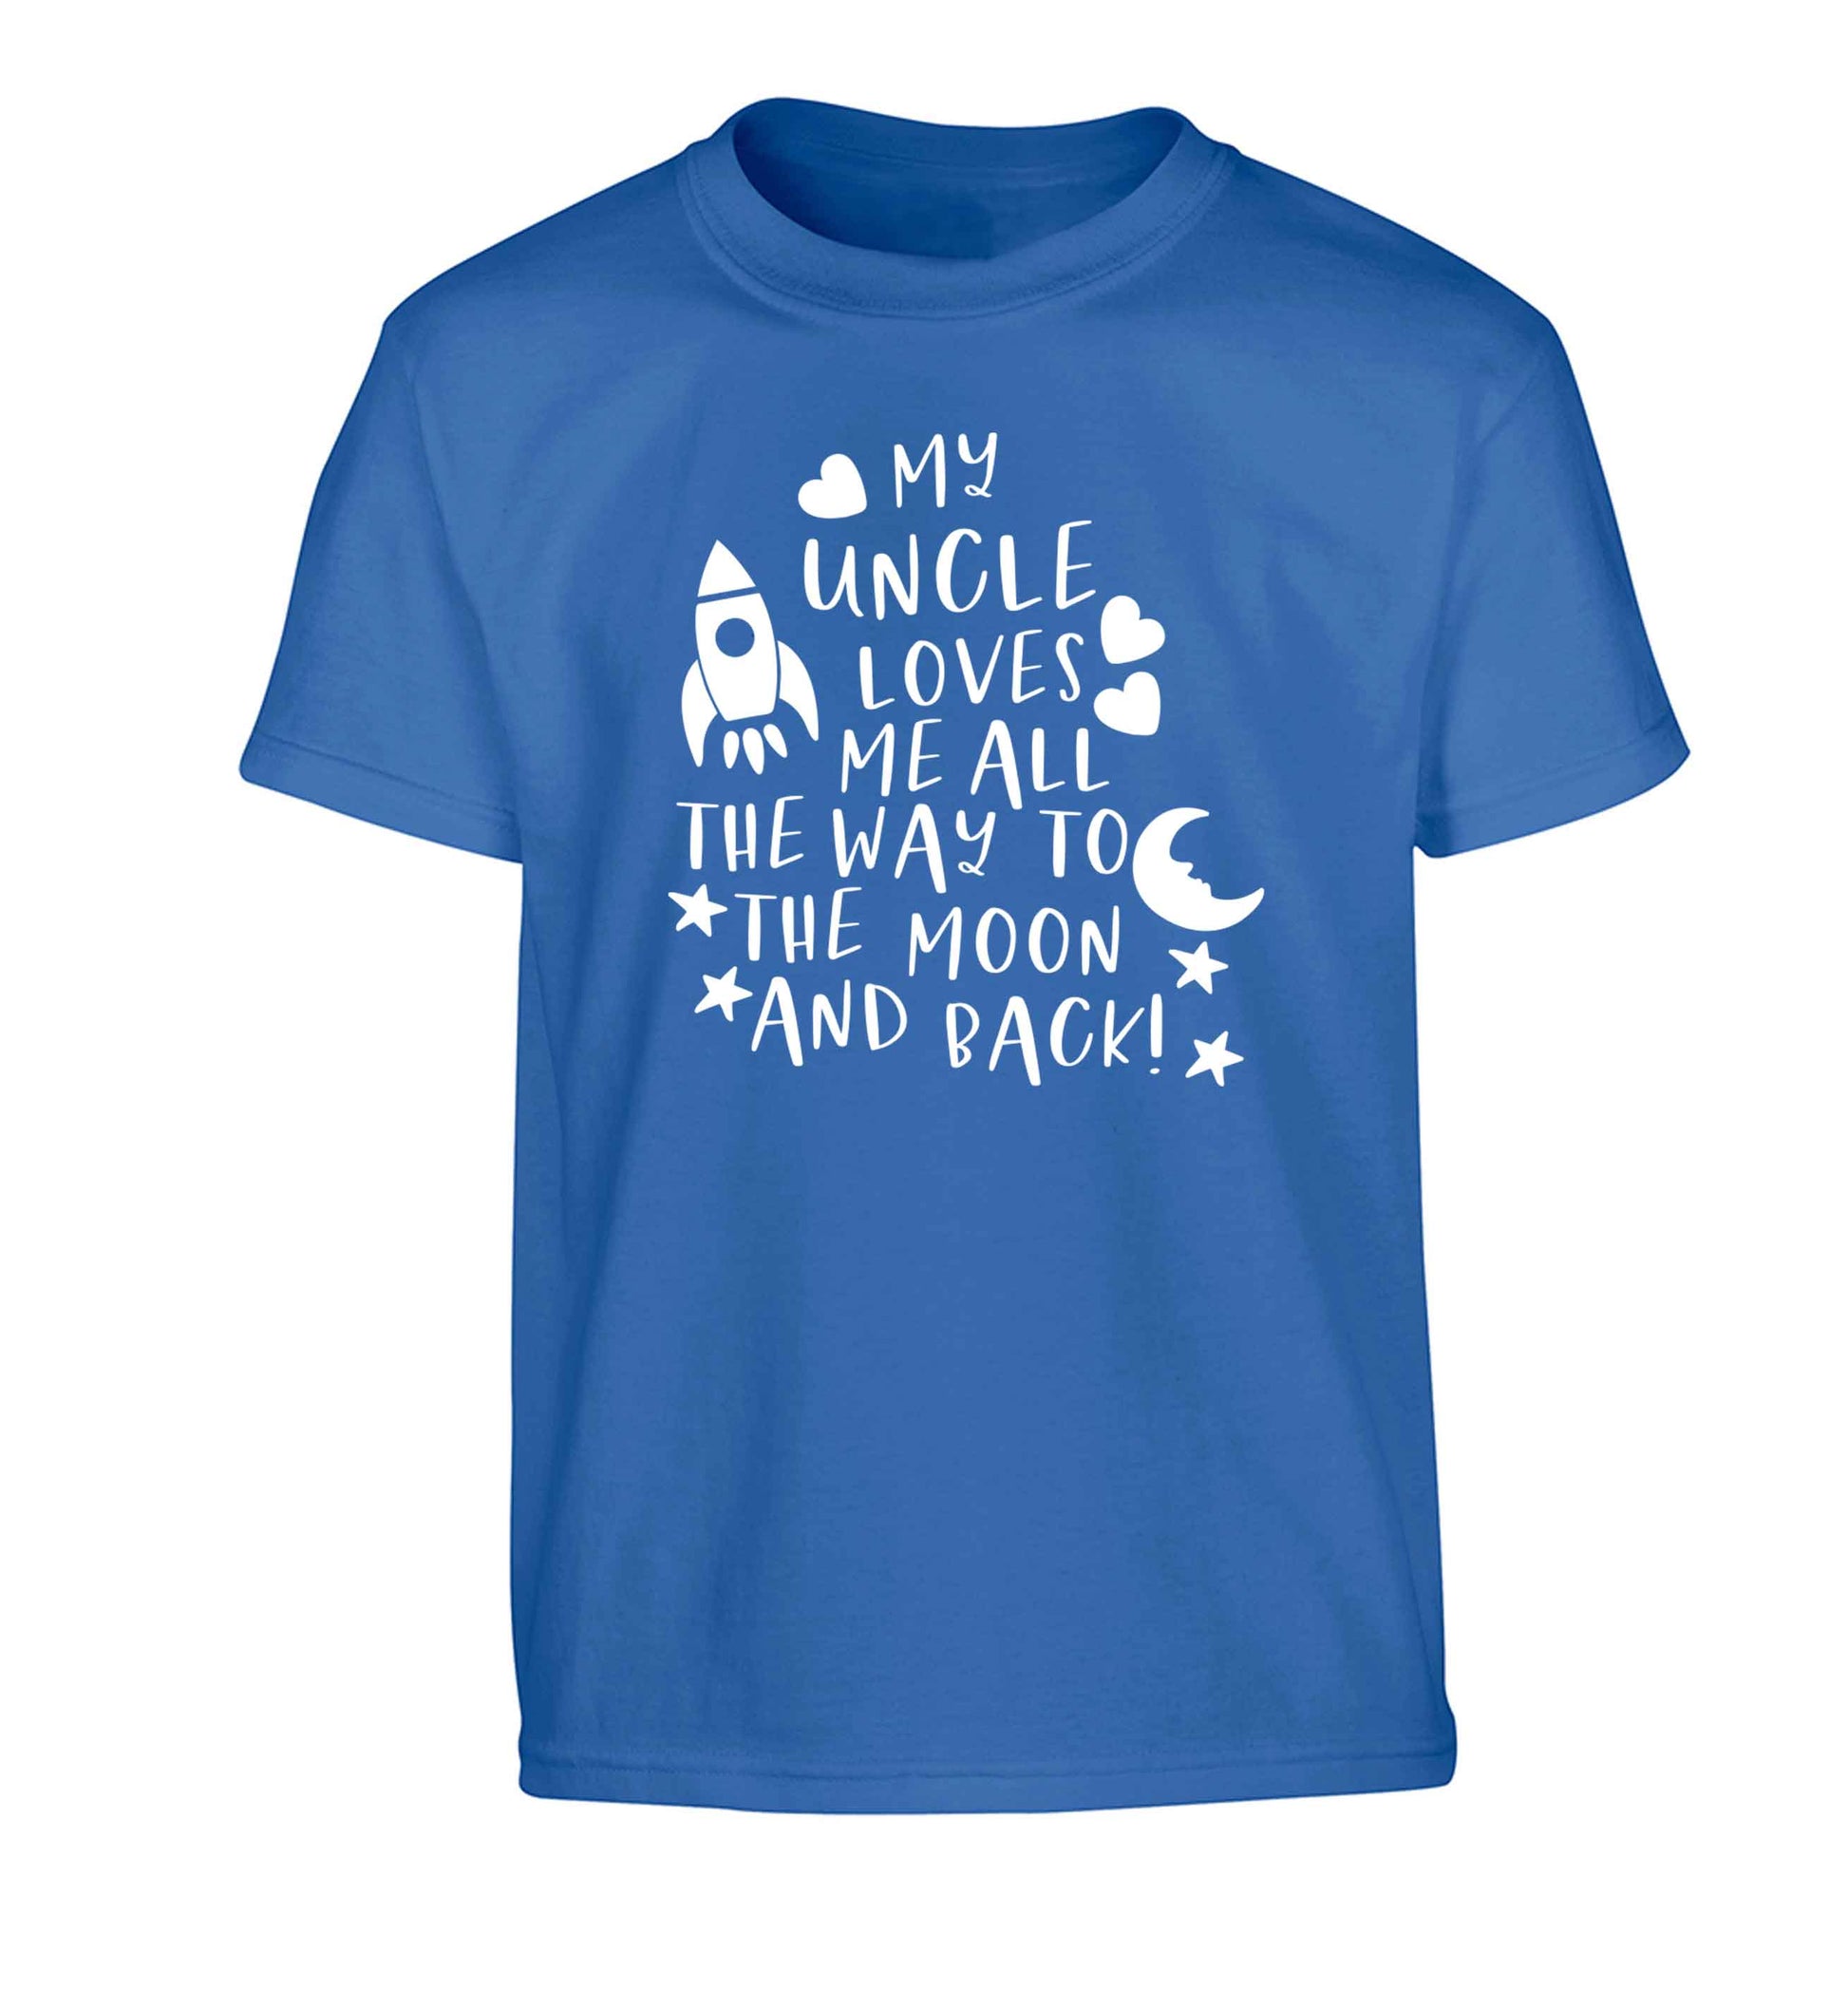 My uncle loves me all the way to the moon and back Children's blue Tshirt 12-13 Years